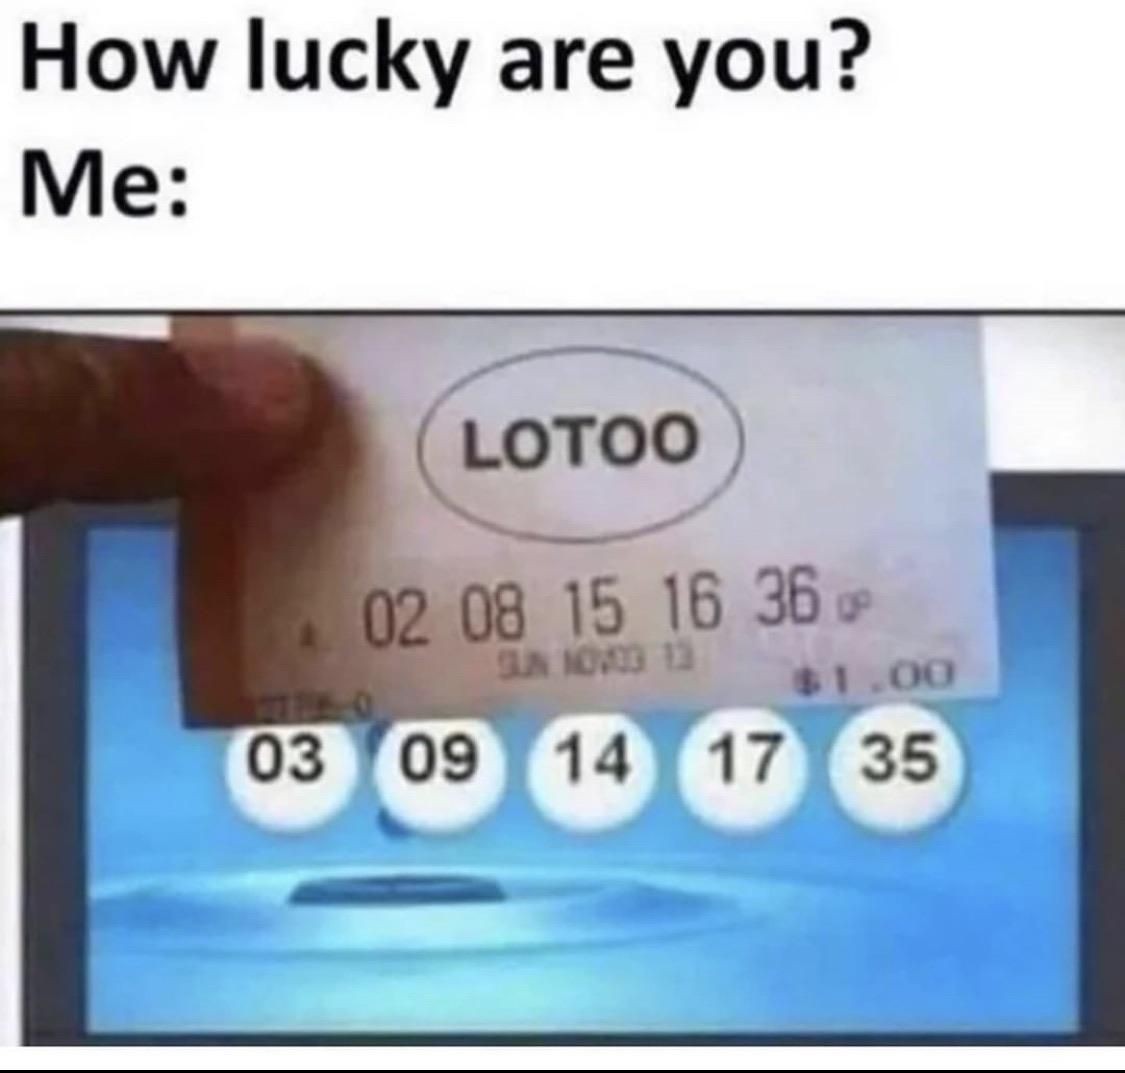 I am this lucky